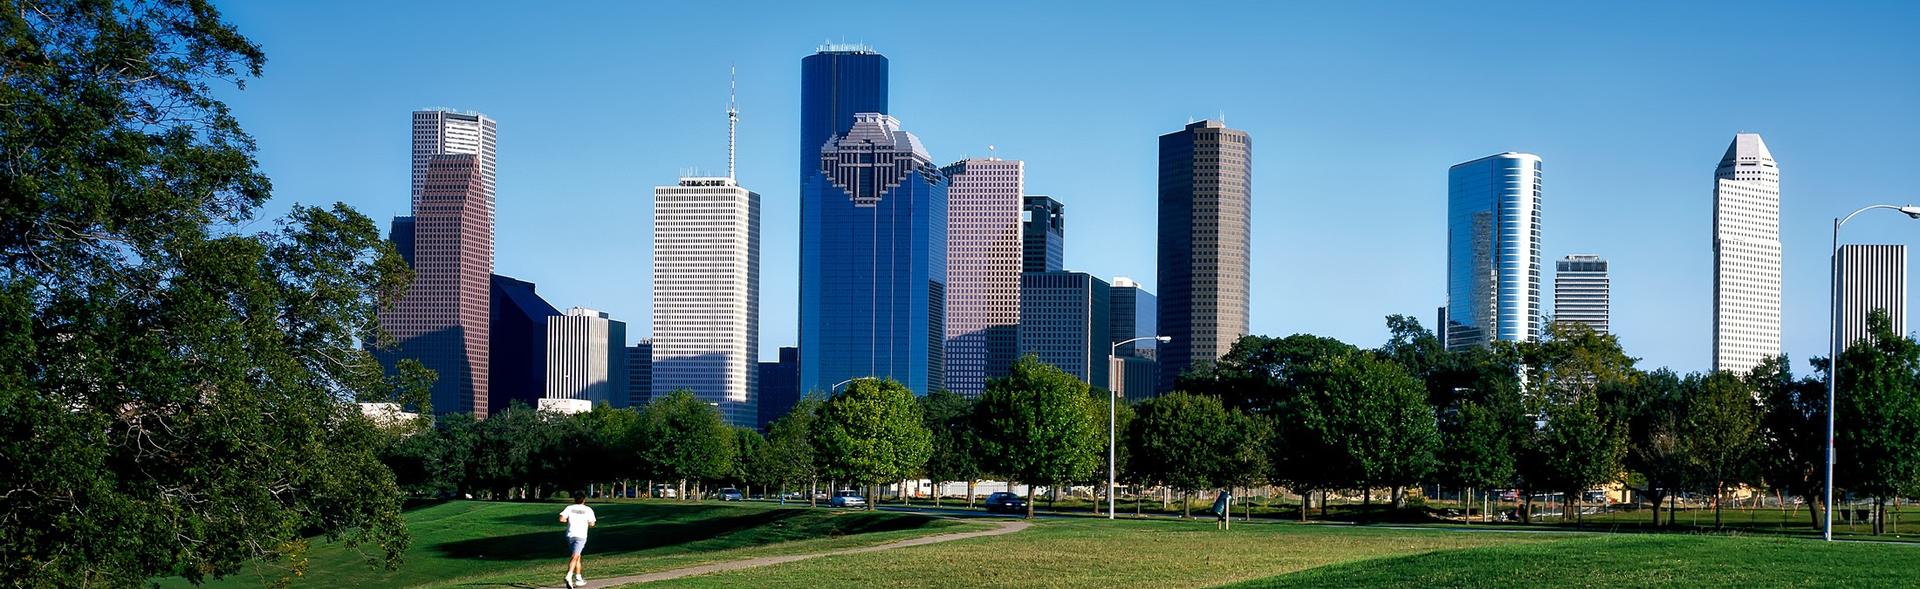 Houston skyline during the day